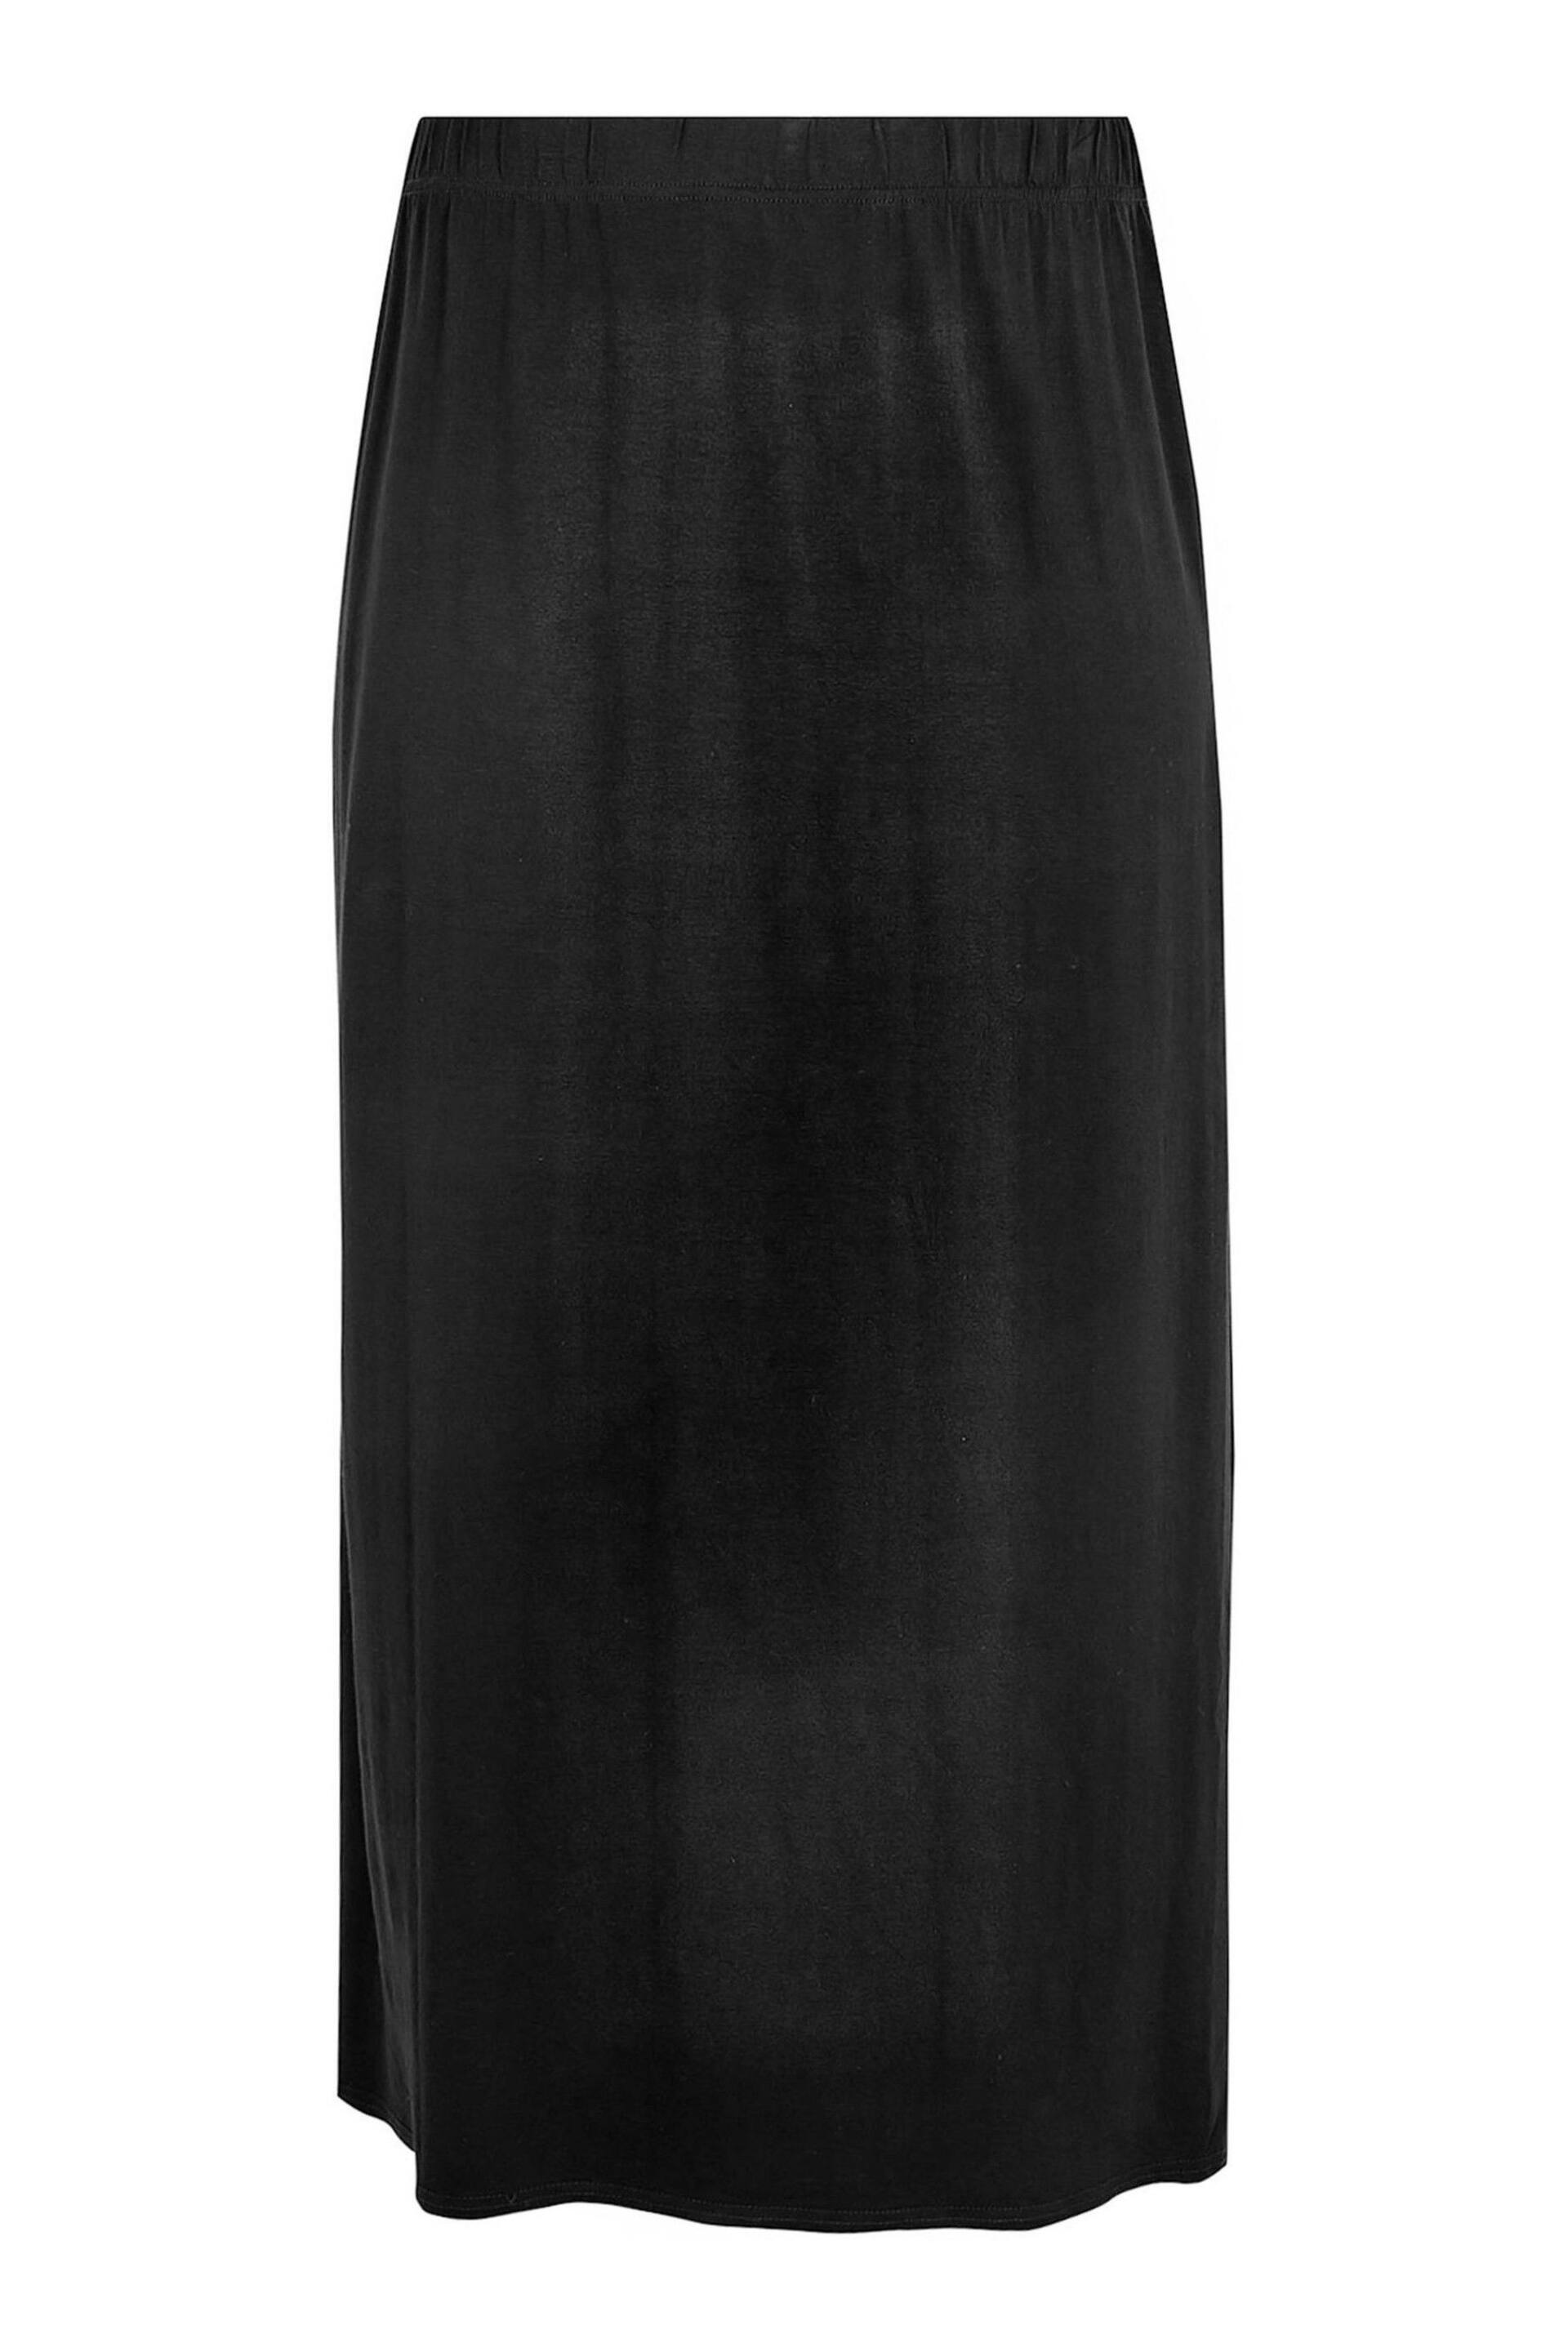 Yours Curve Black Tube Maxi Skirt - Image 5 of 5